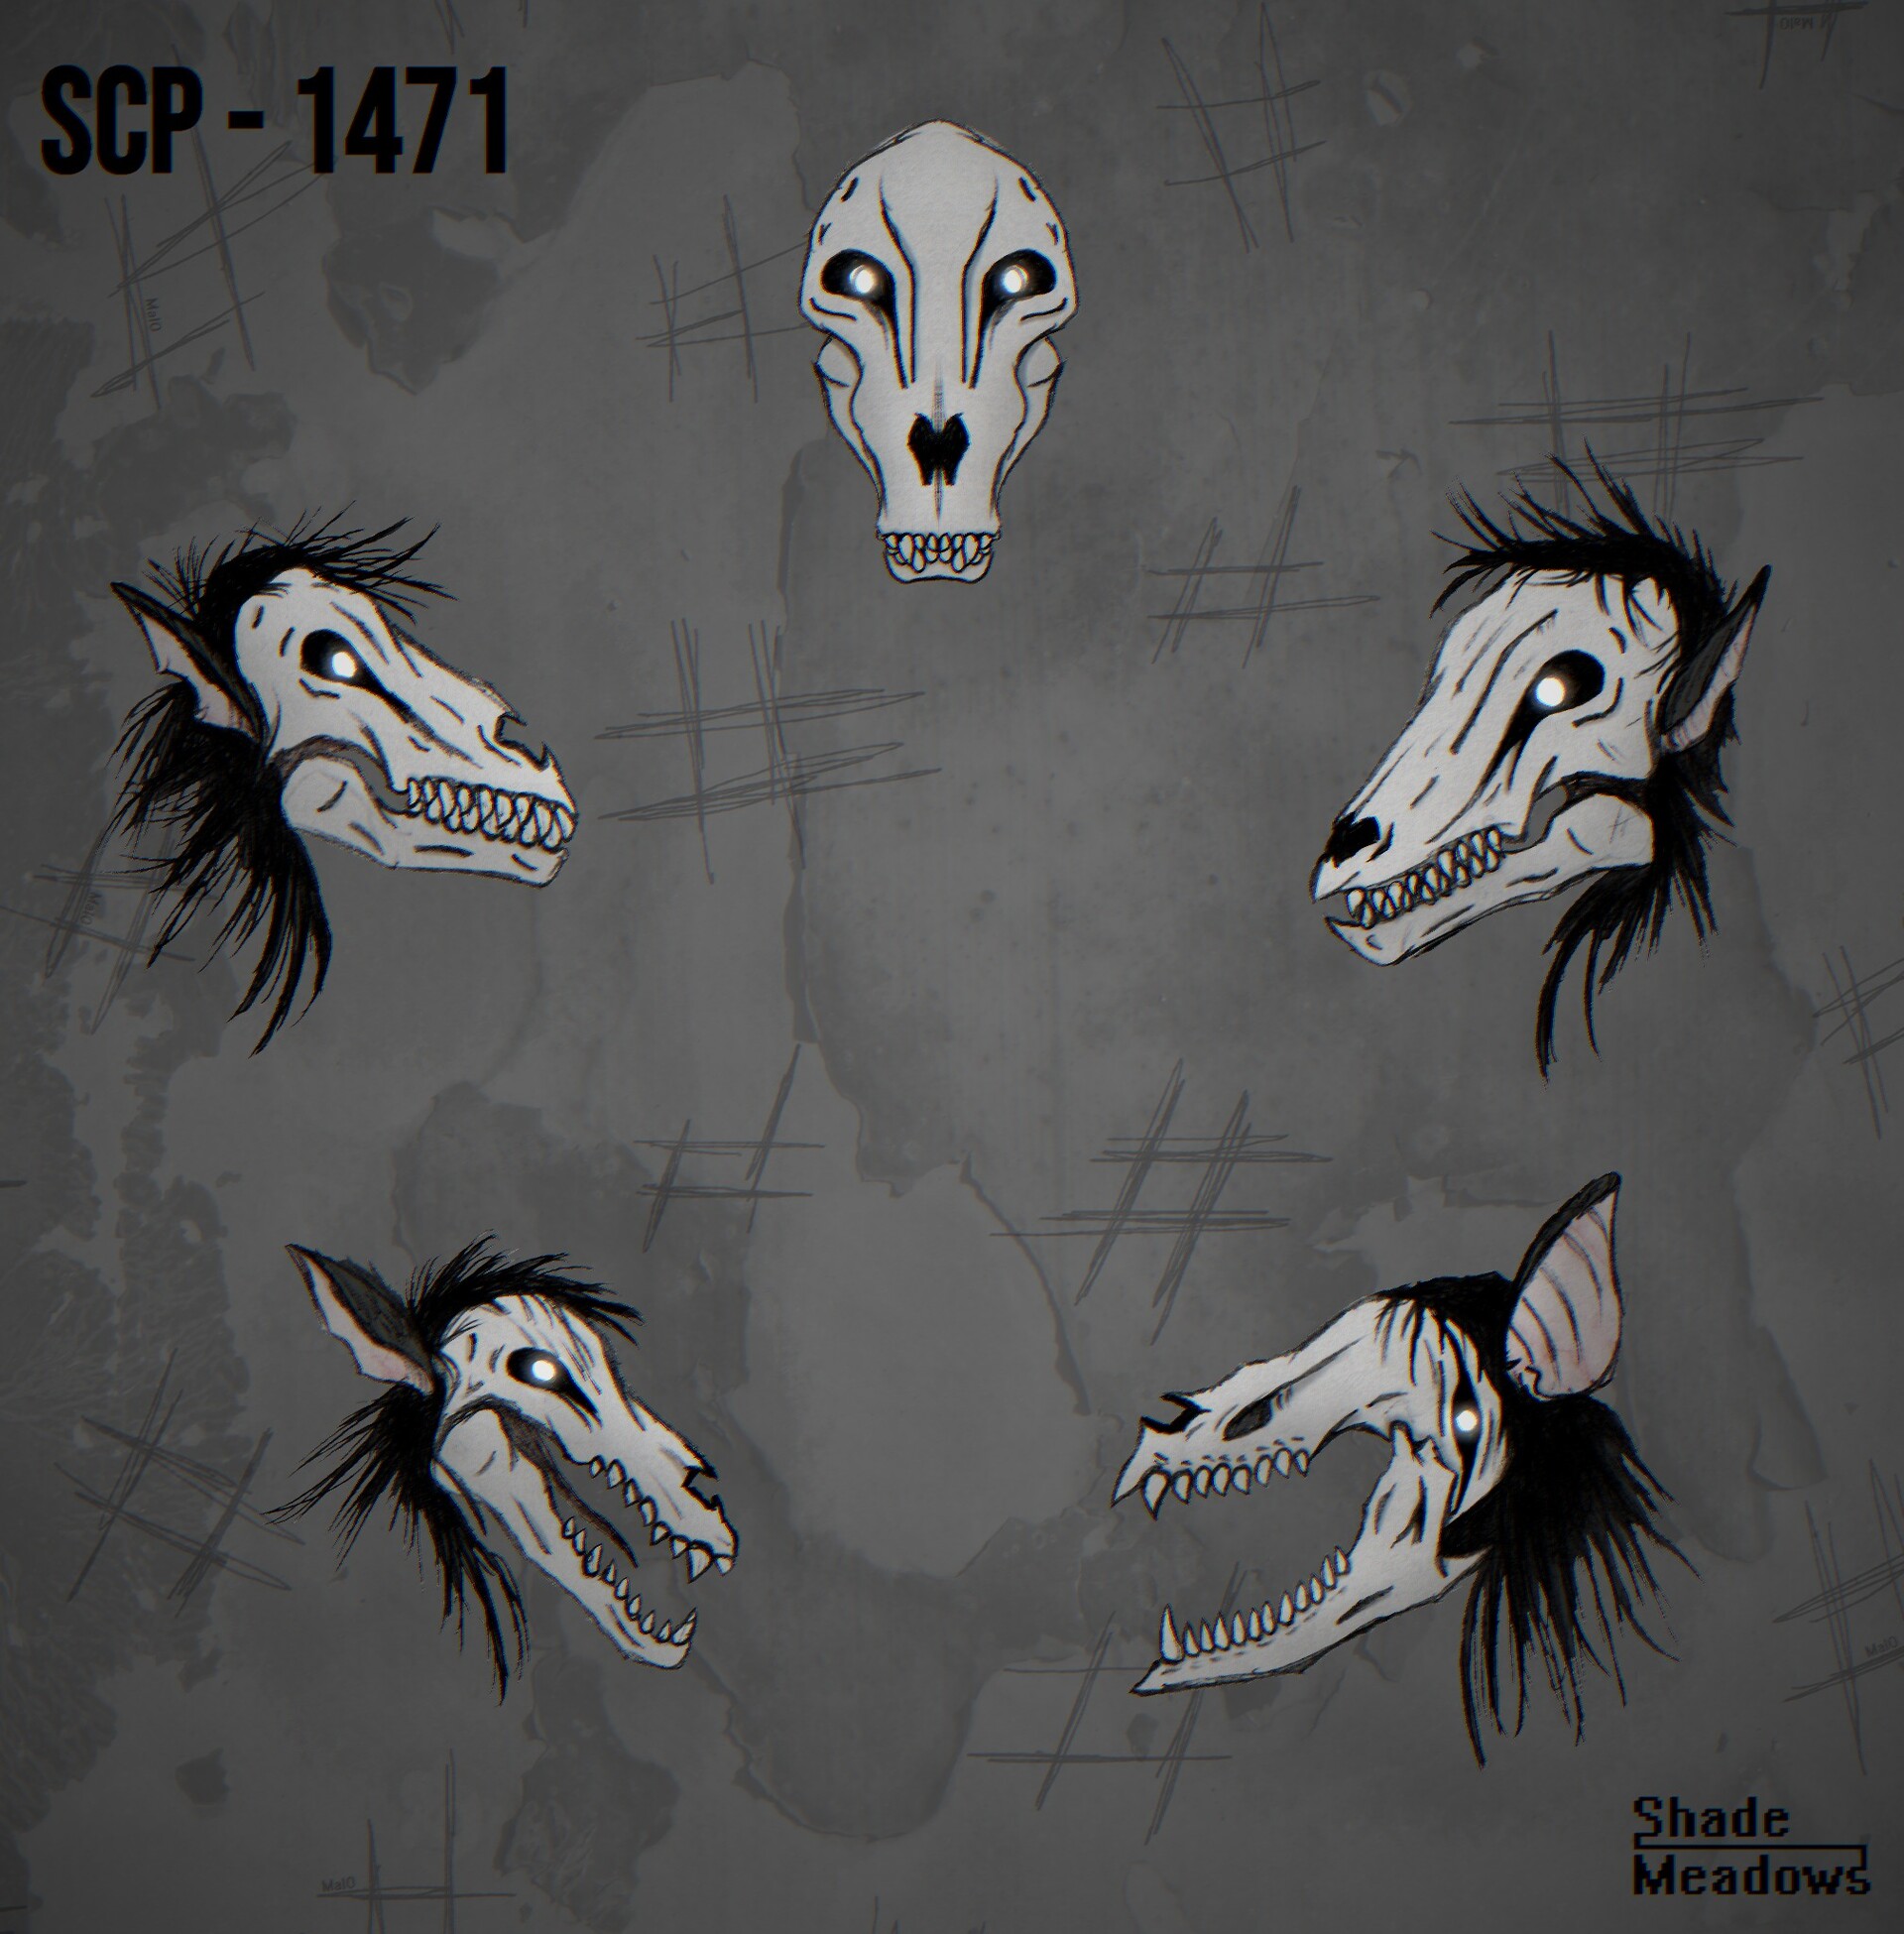 I made some SCP-1471 fan art! : SCP